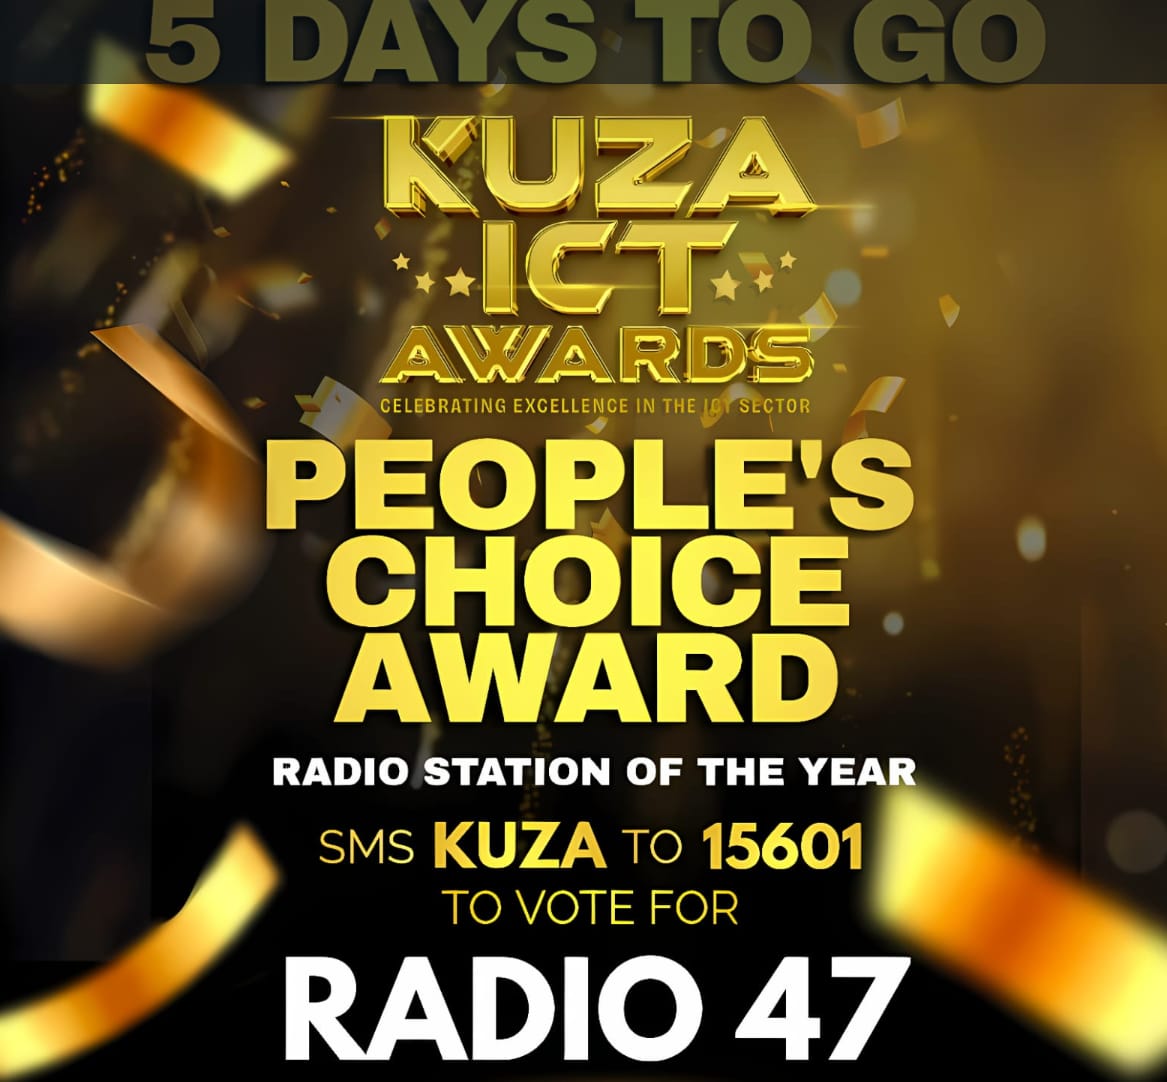 5 Days To Go! SMS word KUZA to 15601 and VOTE for RADIO 47 as the Radio Station of the Year. VOTE Online kuzaawards.co.ke #HapaNdipo